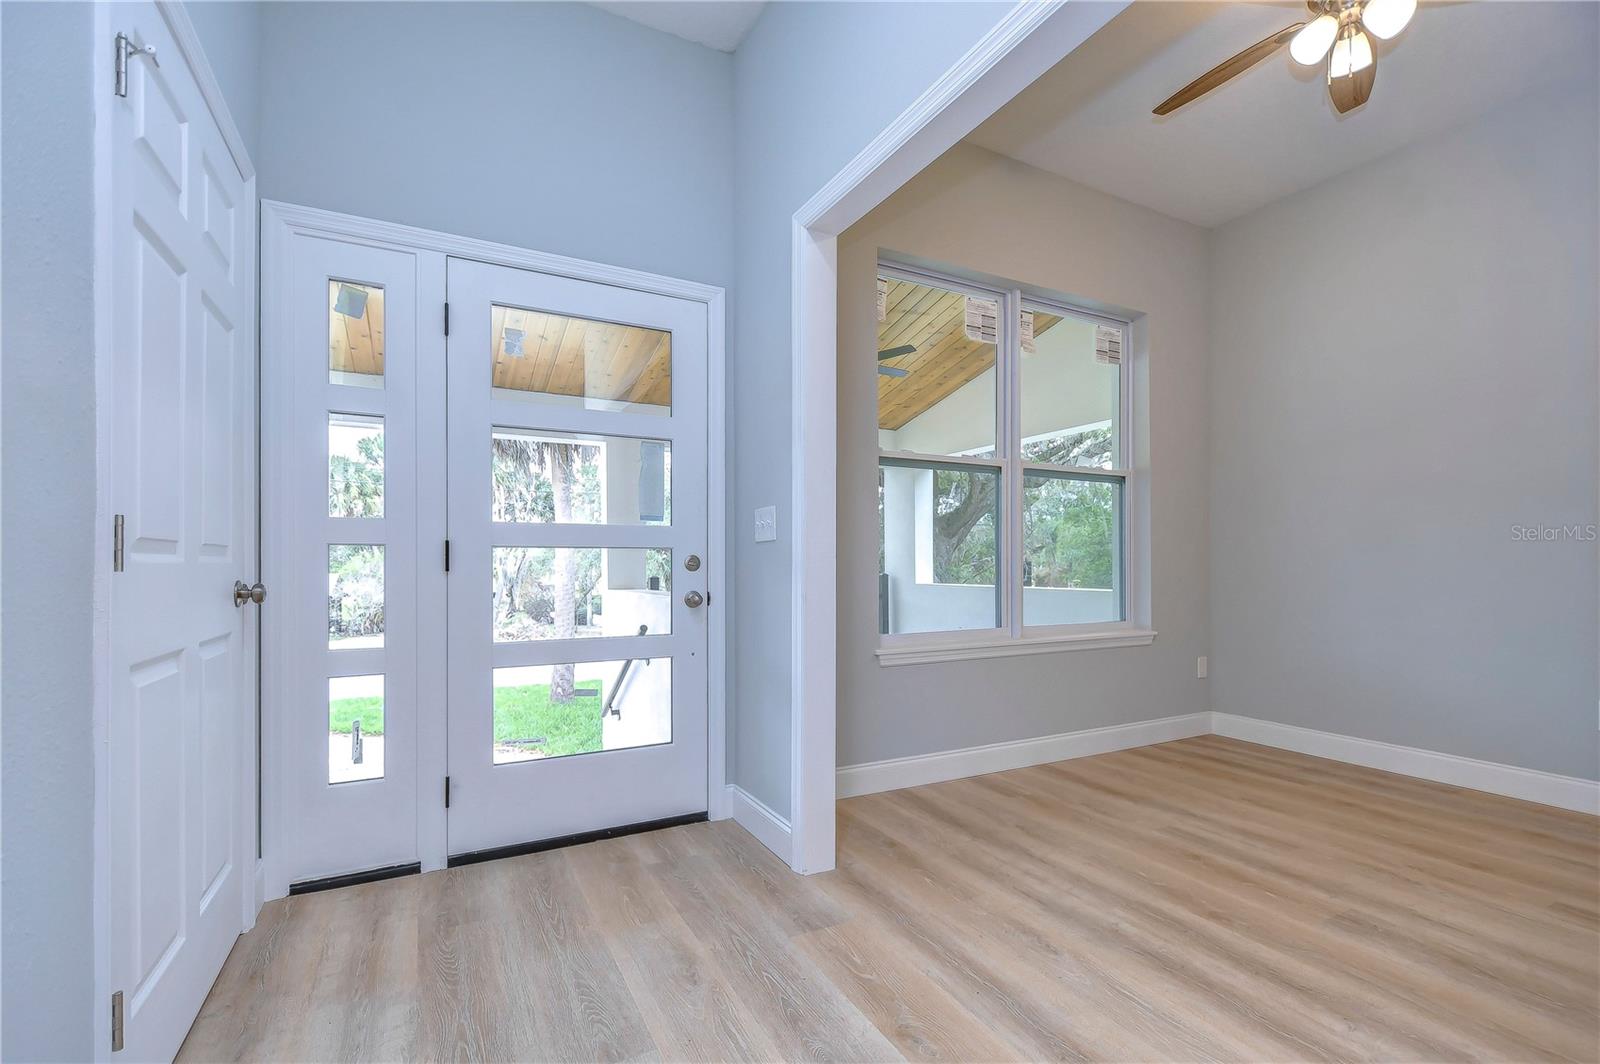 This flex space just inside the front door offers a multitude of uses.